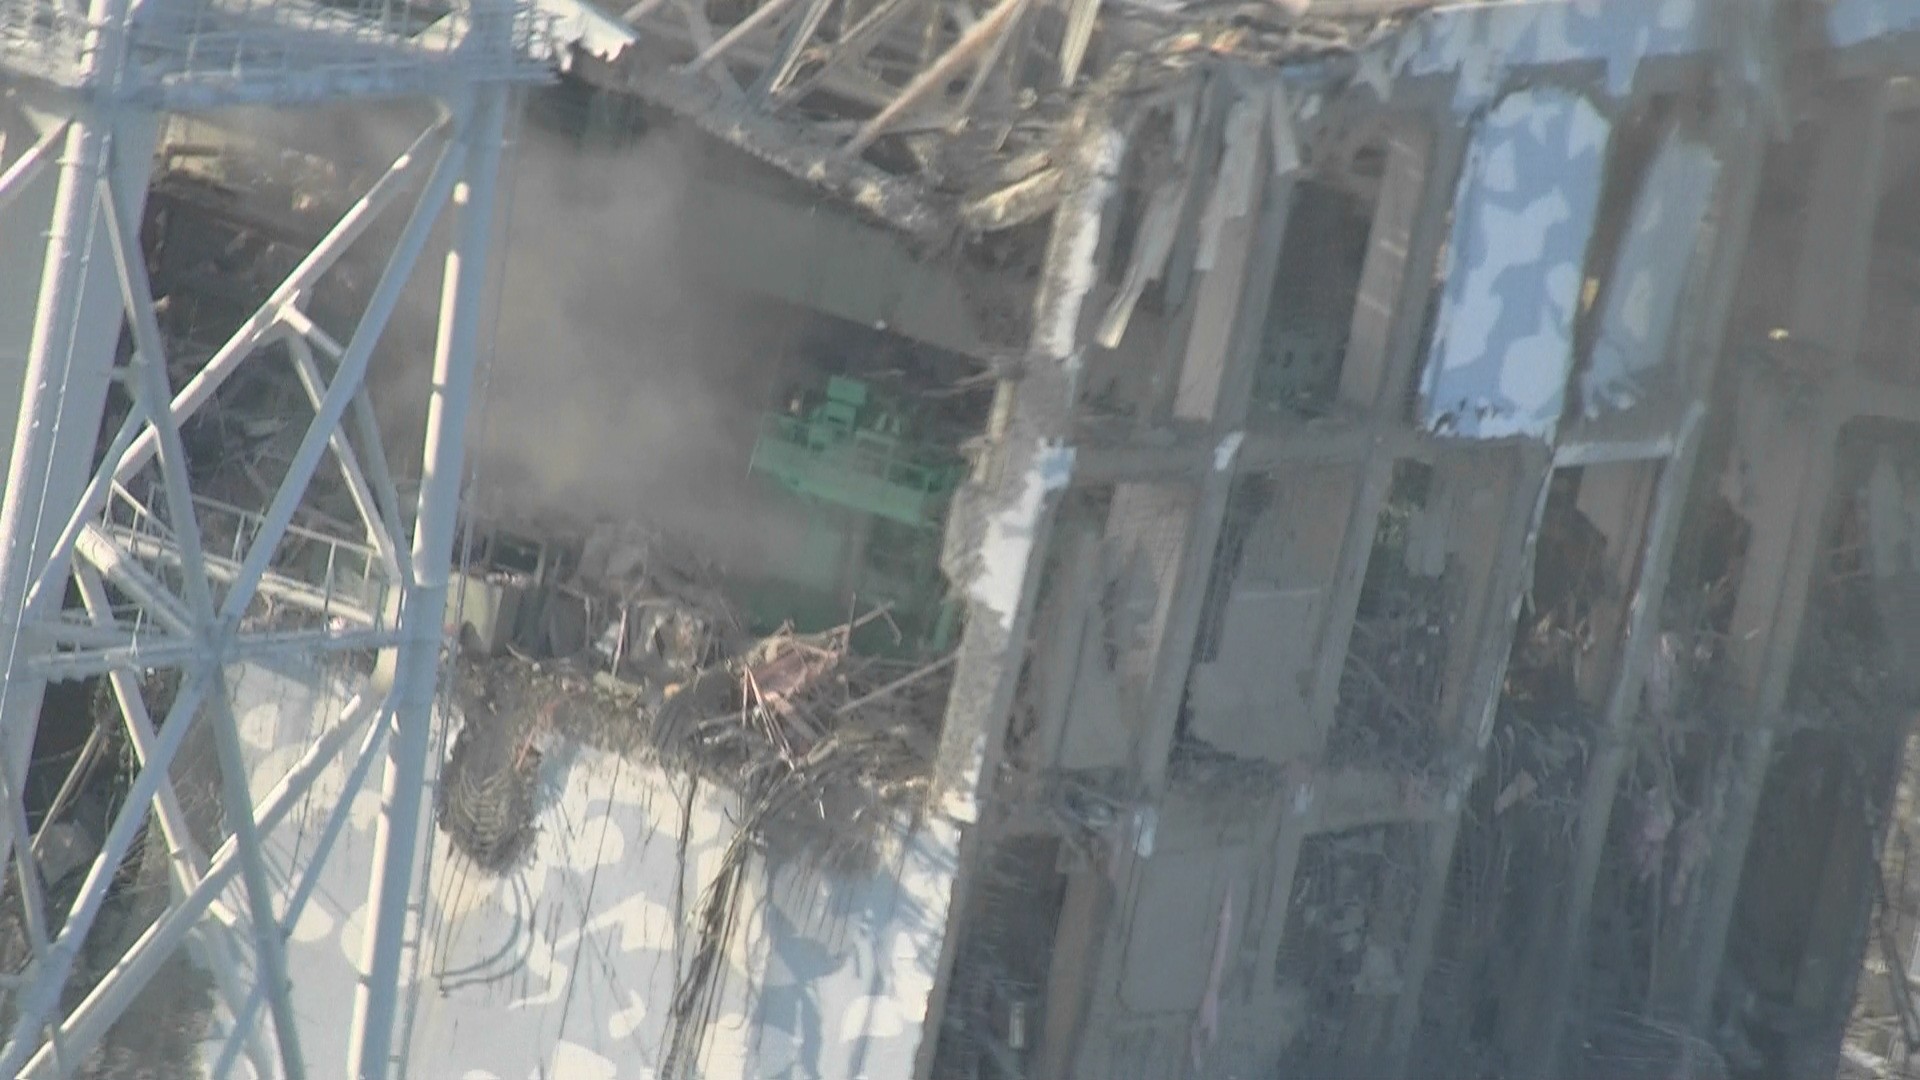 Unit 4 of Fukushima Daiichi Nuclear Power Station (pictured from a helicopter) : Photo2